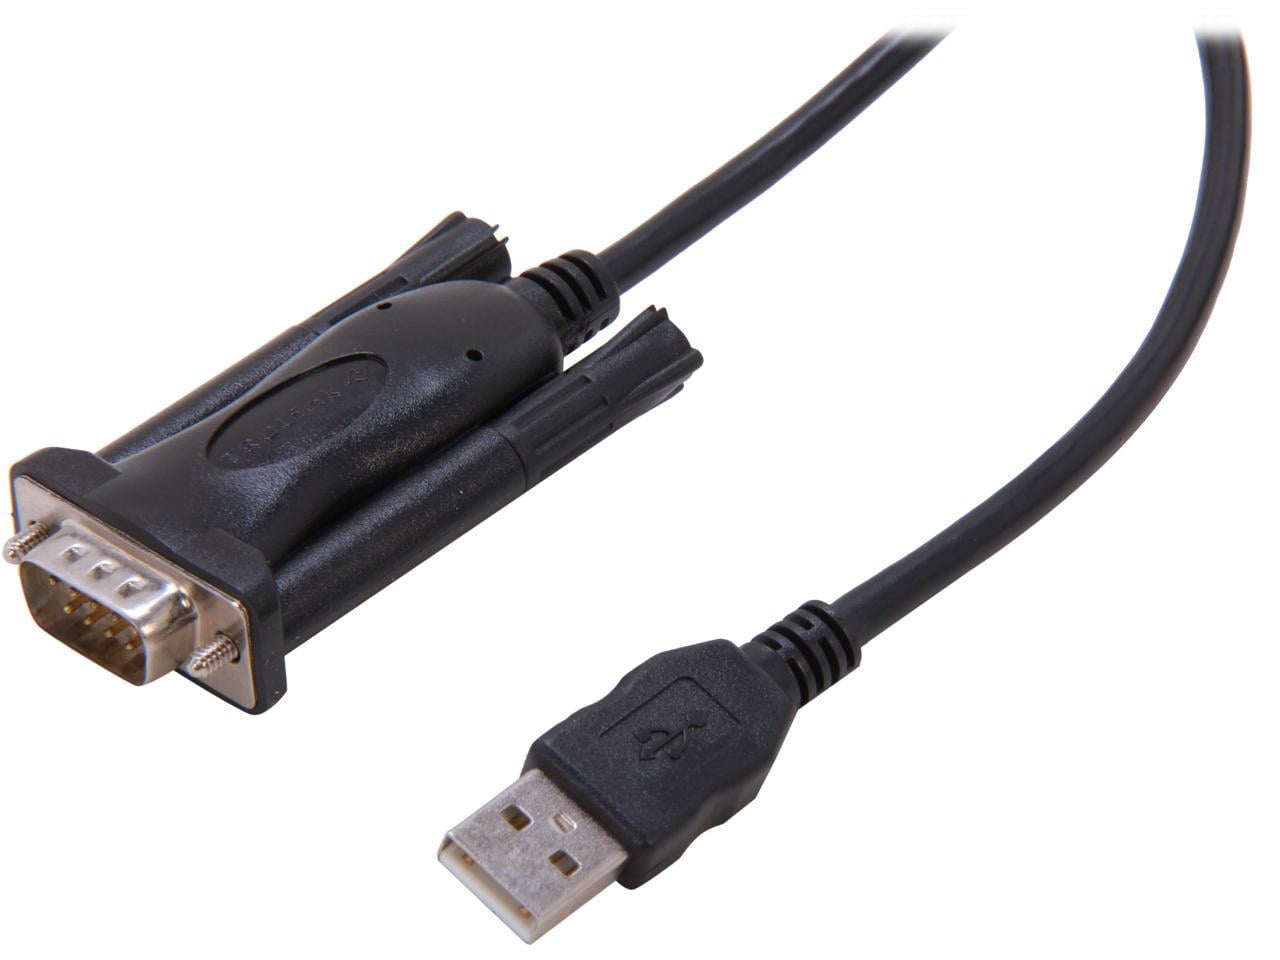 25ft (7.6m) USB A Male to Female Active Extension Cable (Center Booster  Format), USB Extension Cables and Devices, USB Cables, Adapters, and Hubs